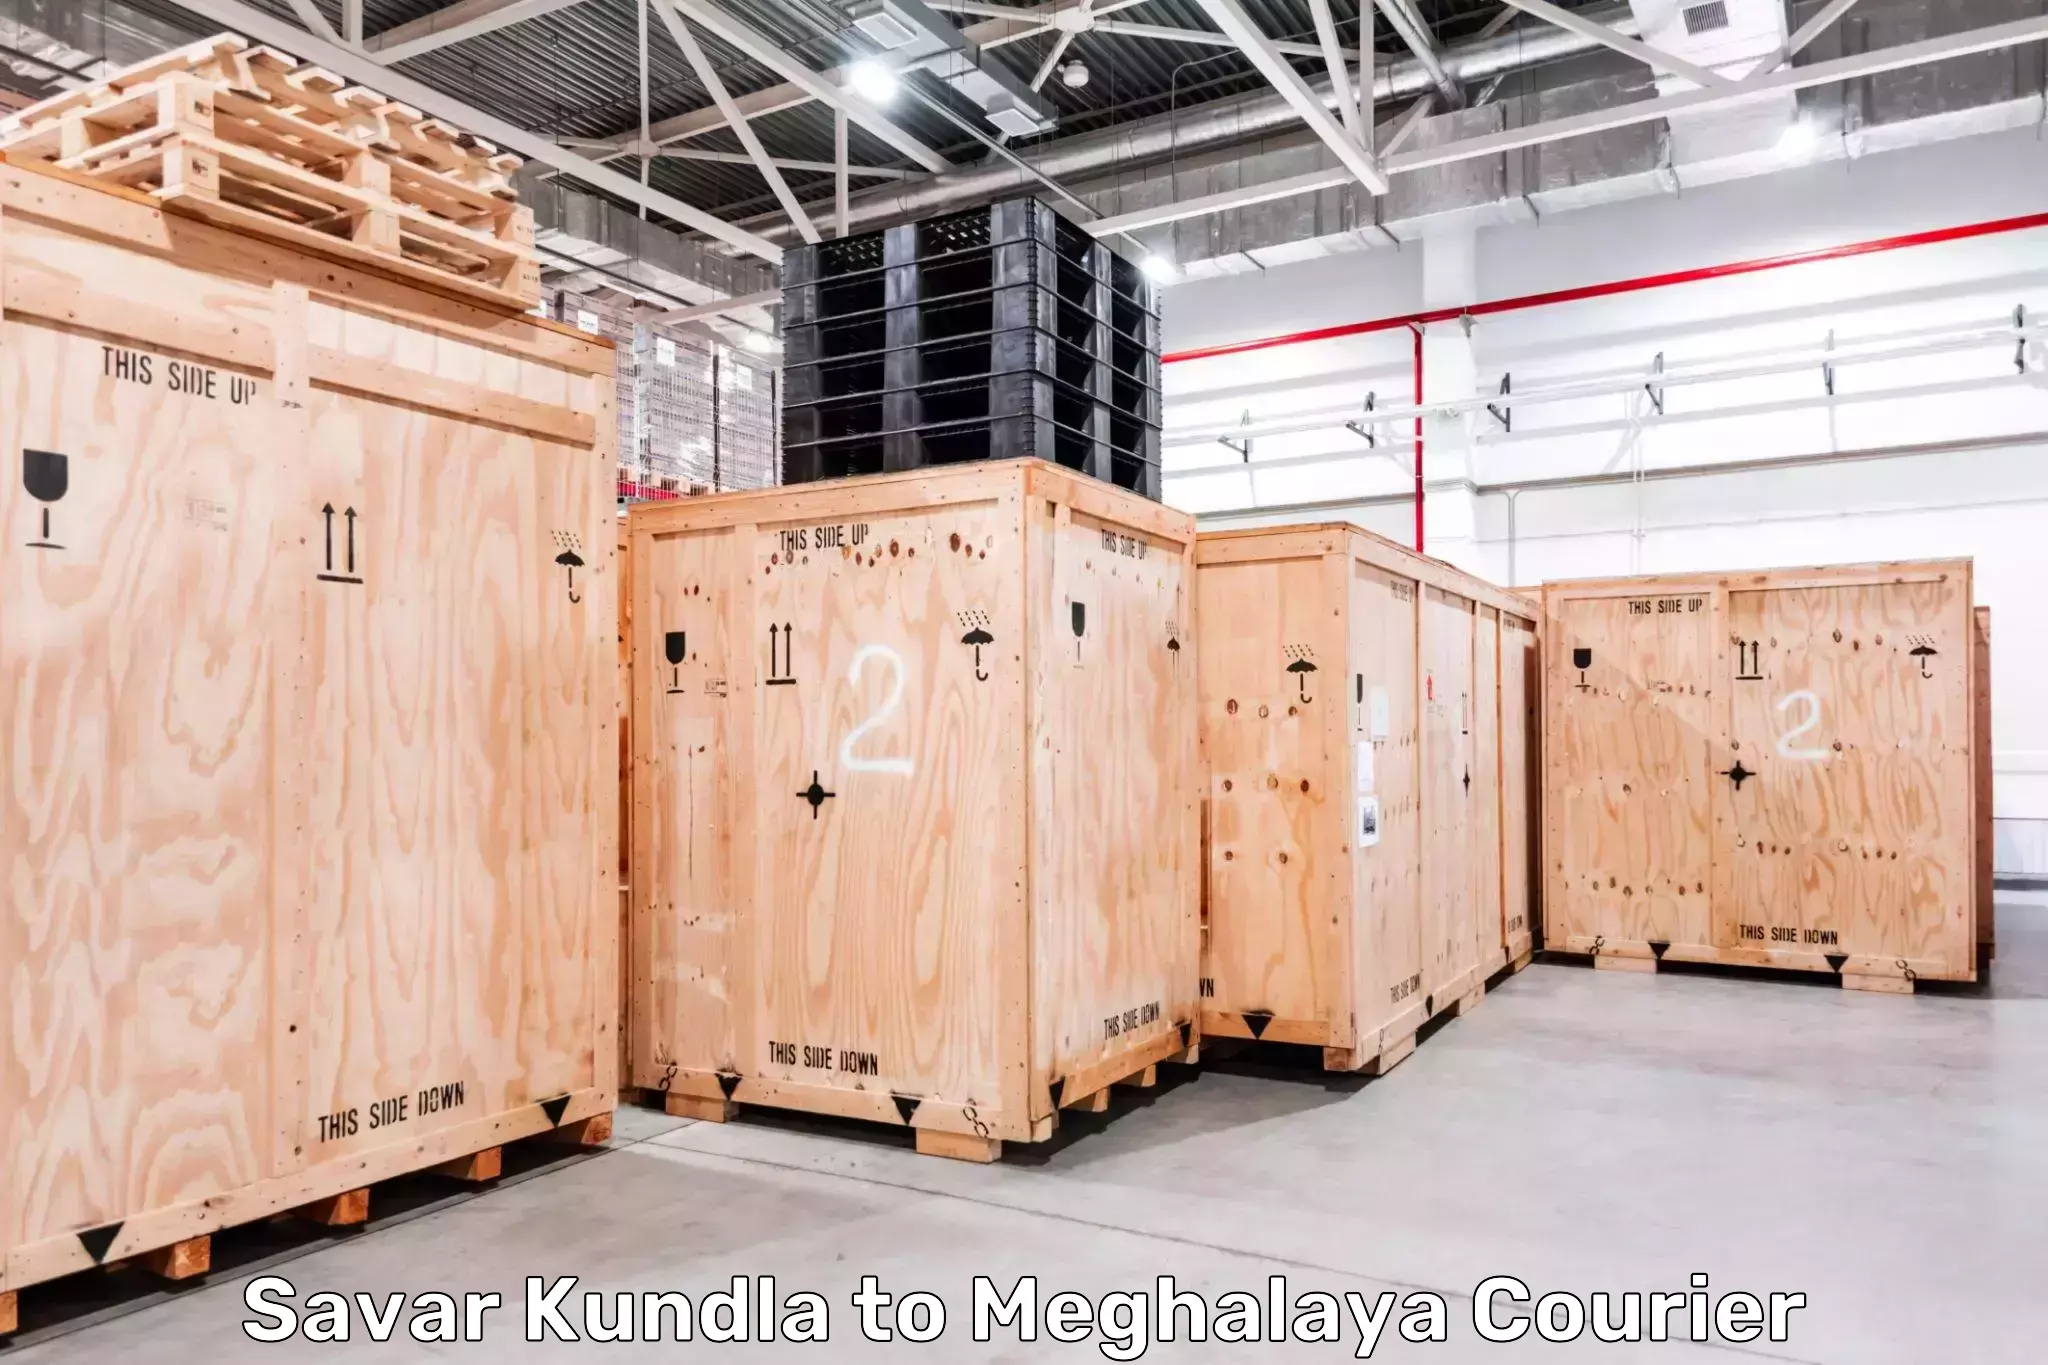 High-capacity courier solutions Savar Kundla to Dkhiah West